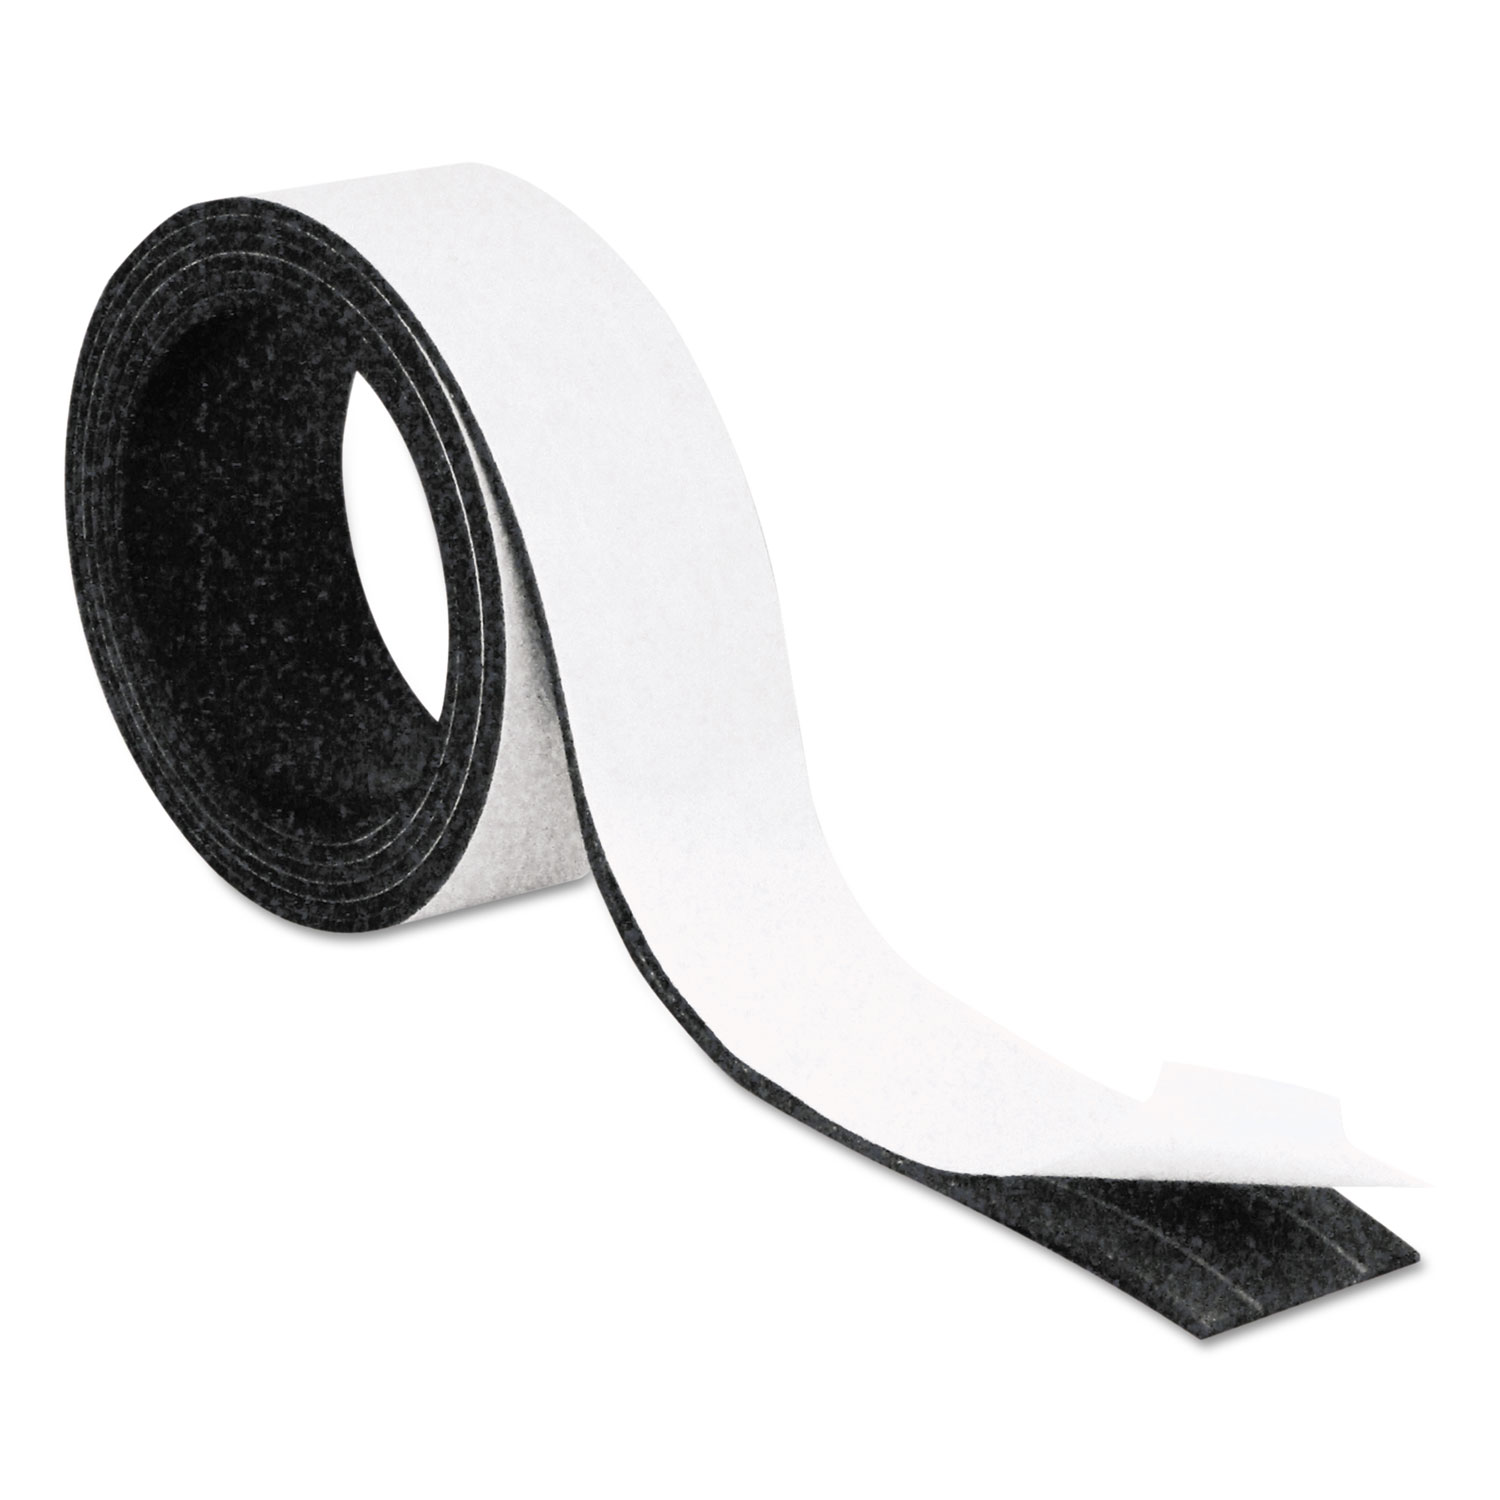  MasterVision FM2319 Magnetic Adhesive Tape Roll, Black, 1/2 x 7 Ft. (BVCFM2319) 